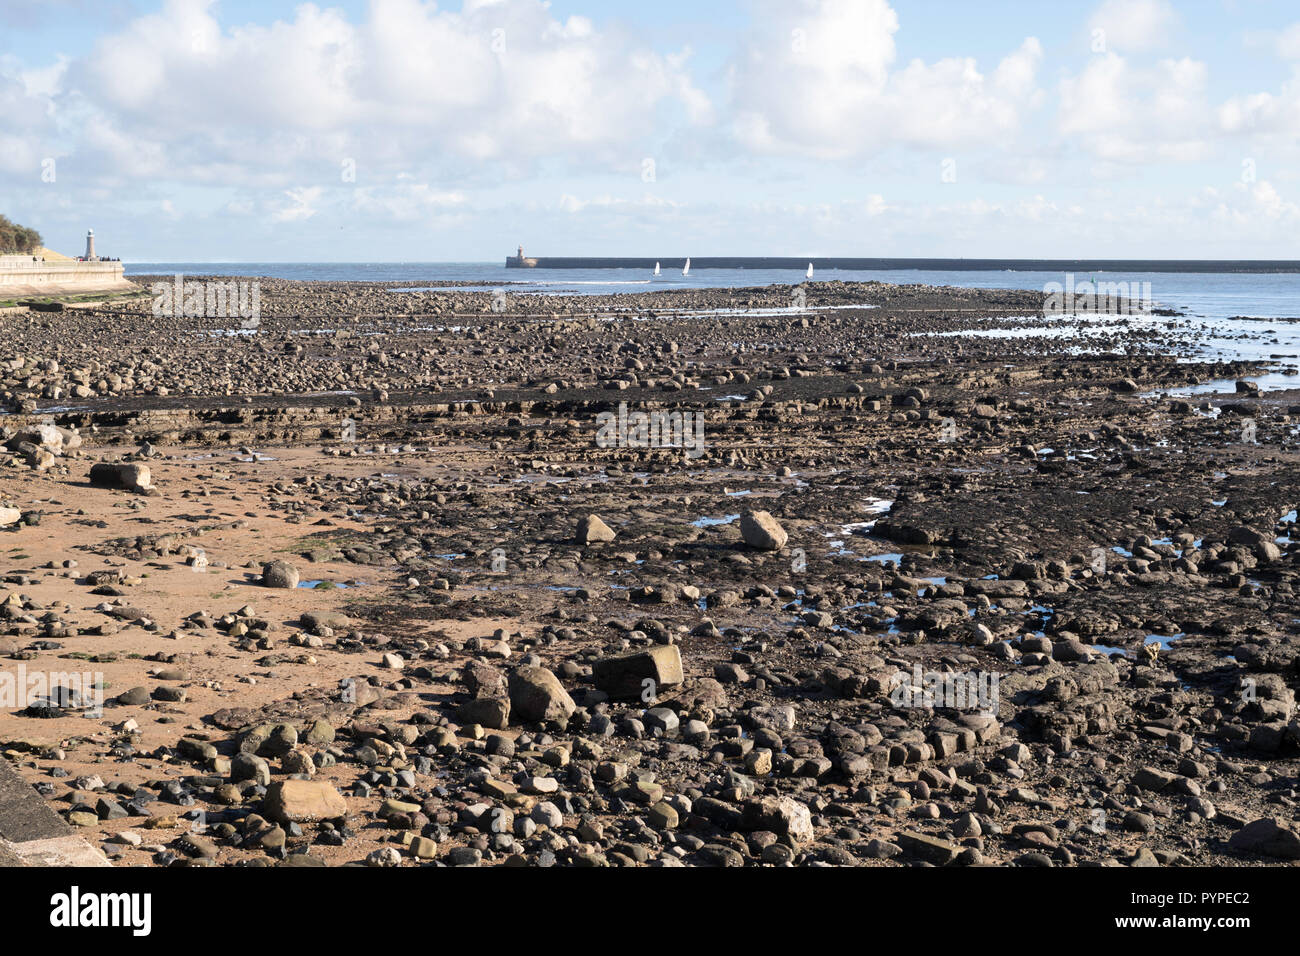 The Black Middens rocks exposed at low tide within the Tyne estuary, North Shields, north east England, UK Stock Photo